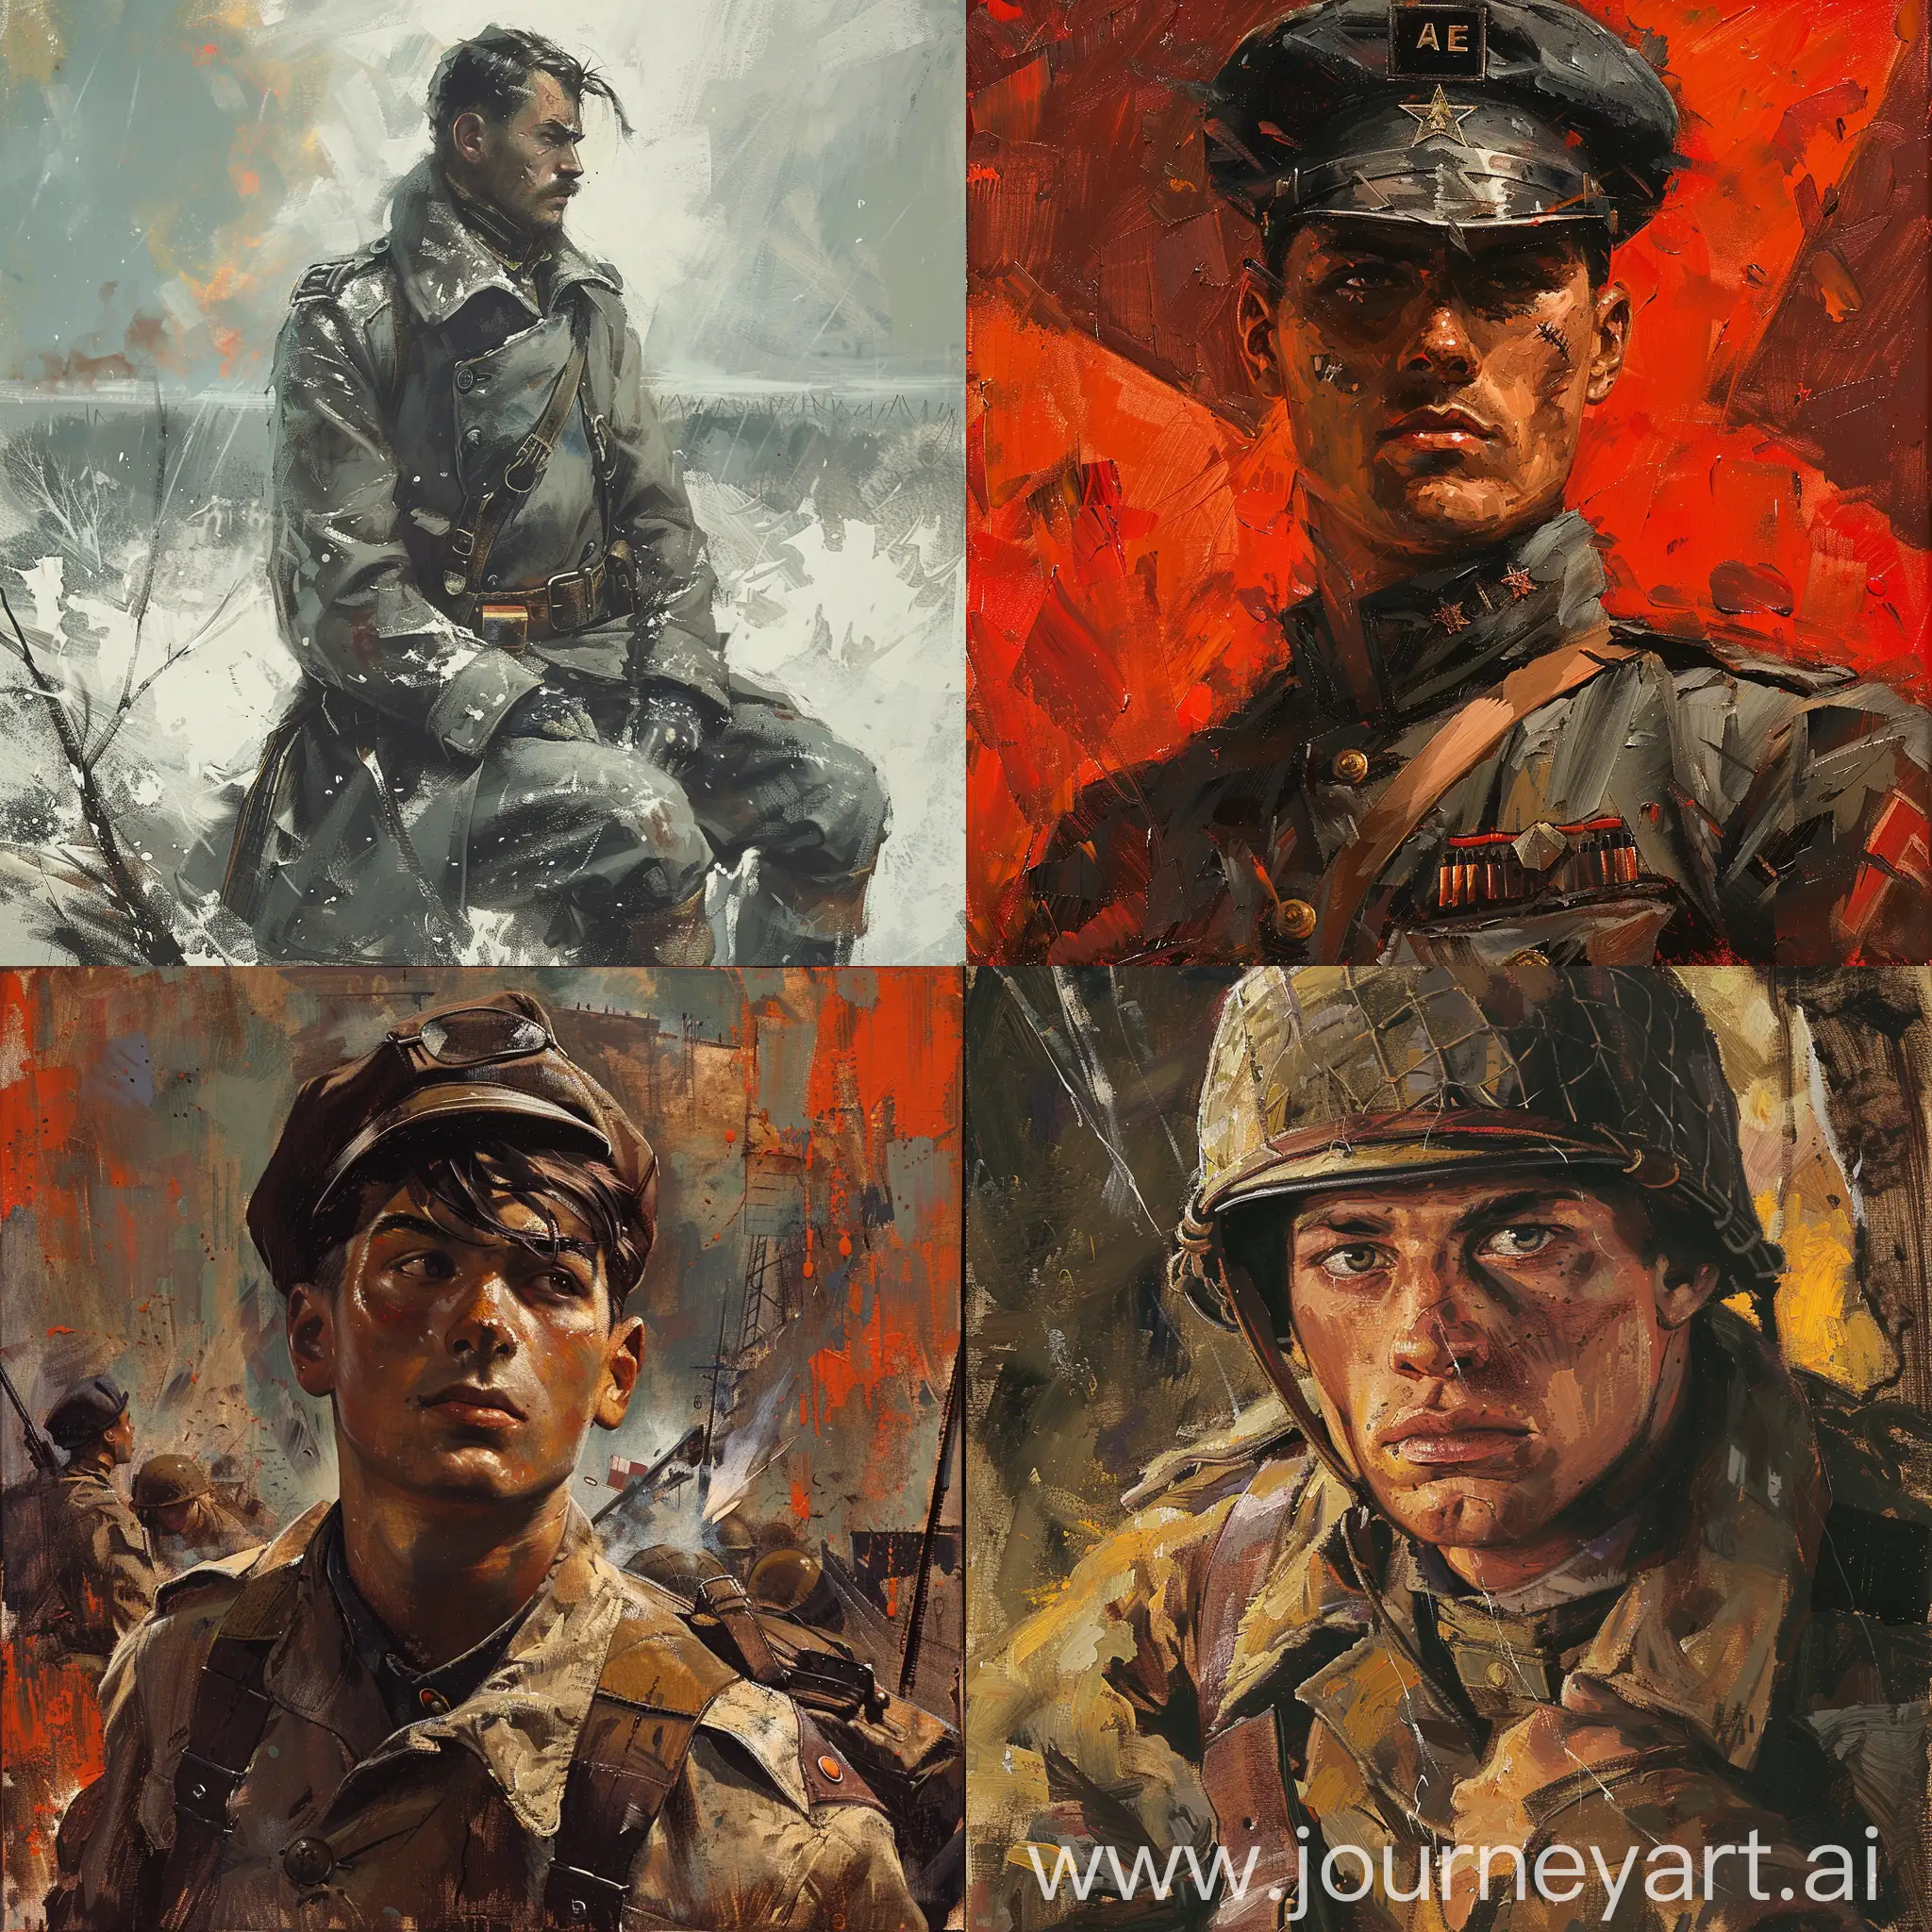 French-Soldier-in-World-War-2-Oil-Painting-Cover-Art